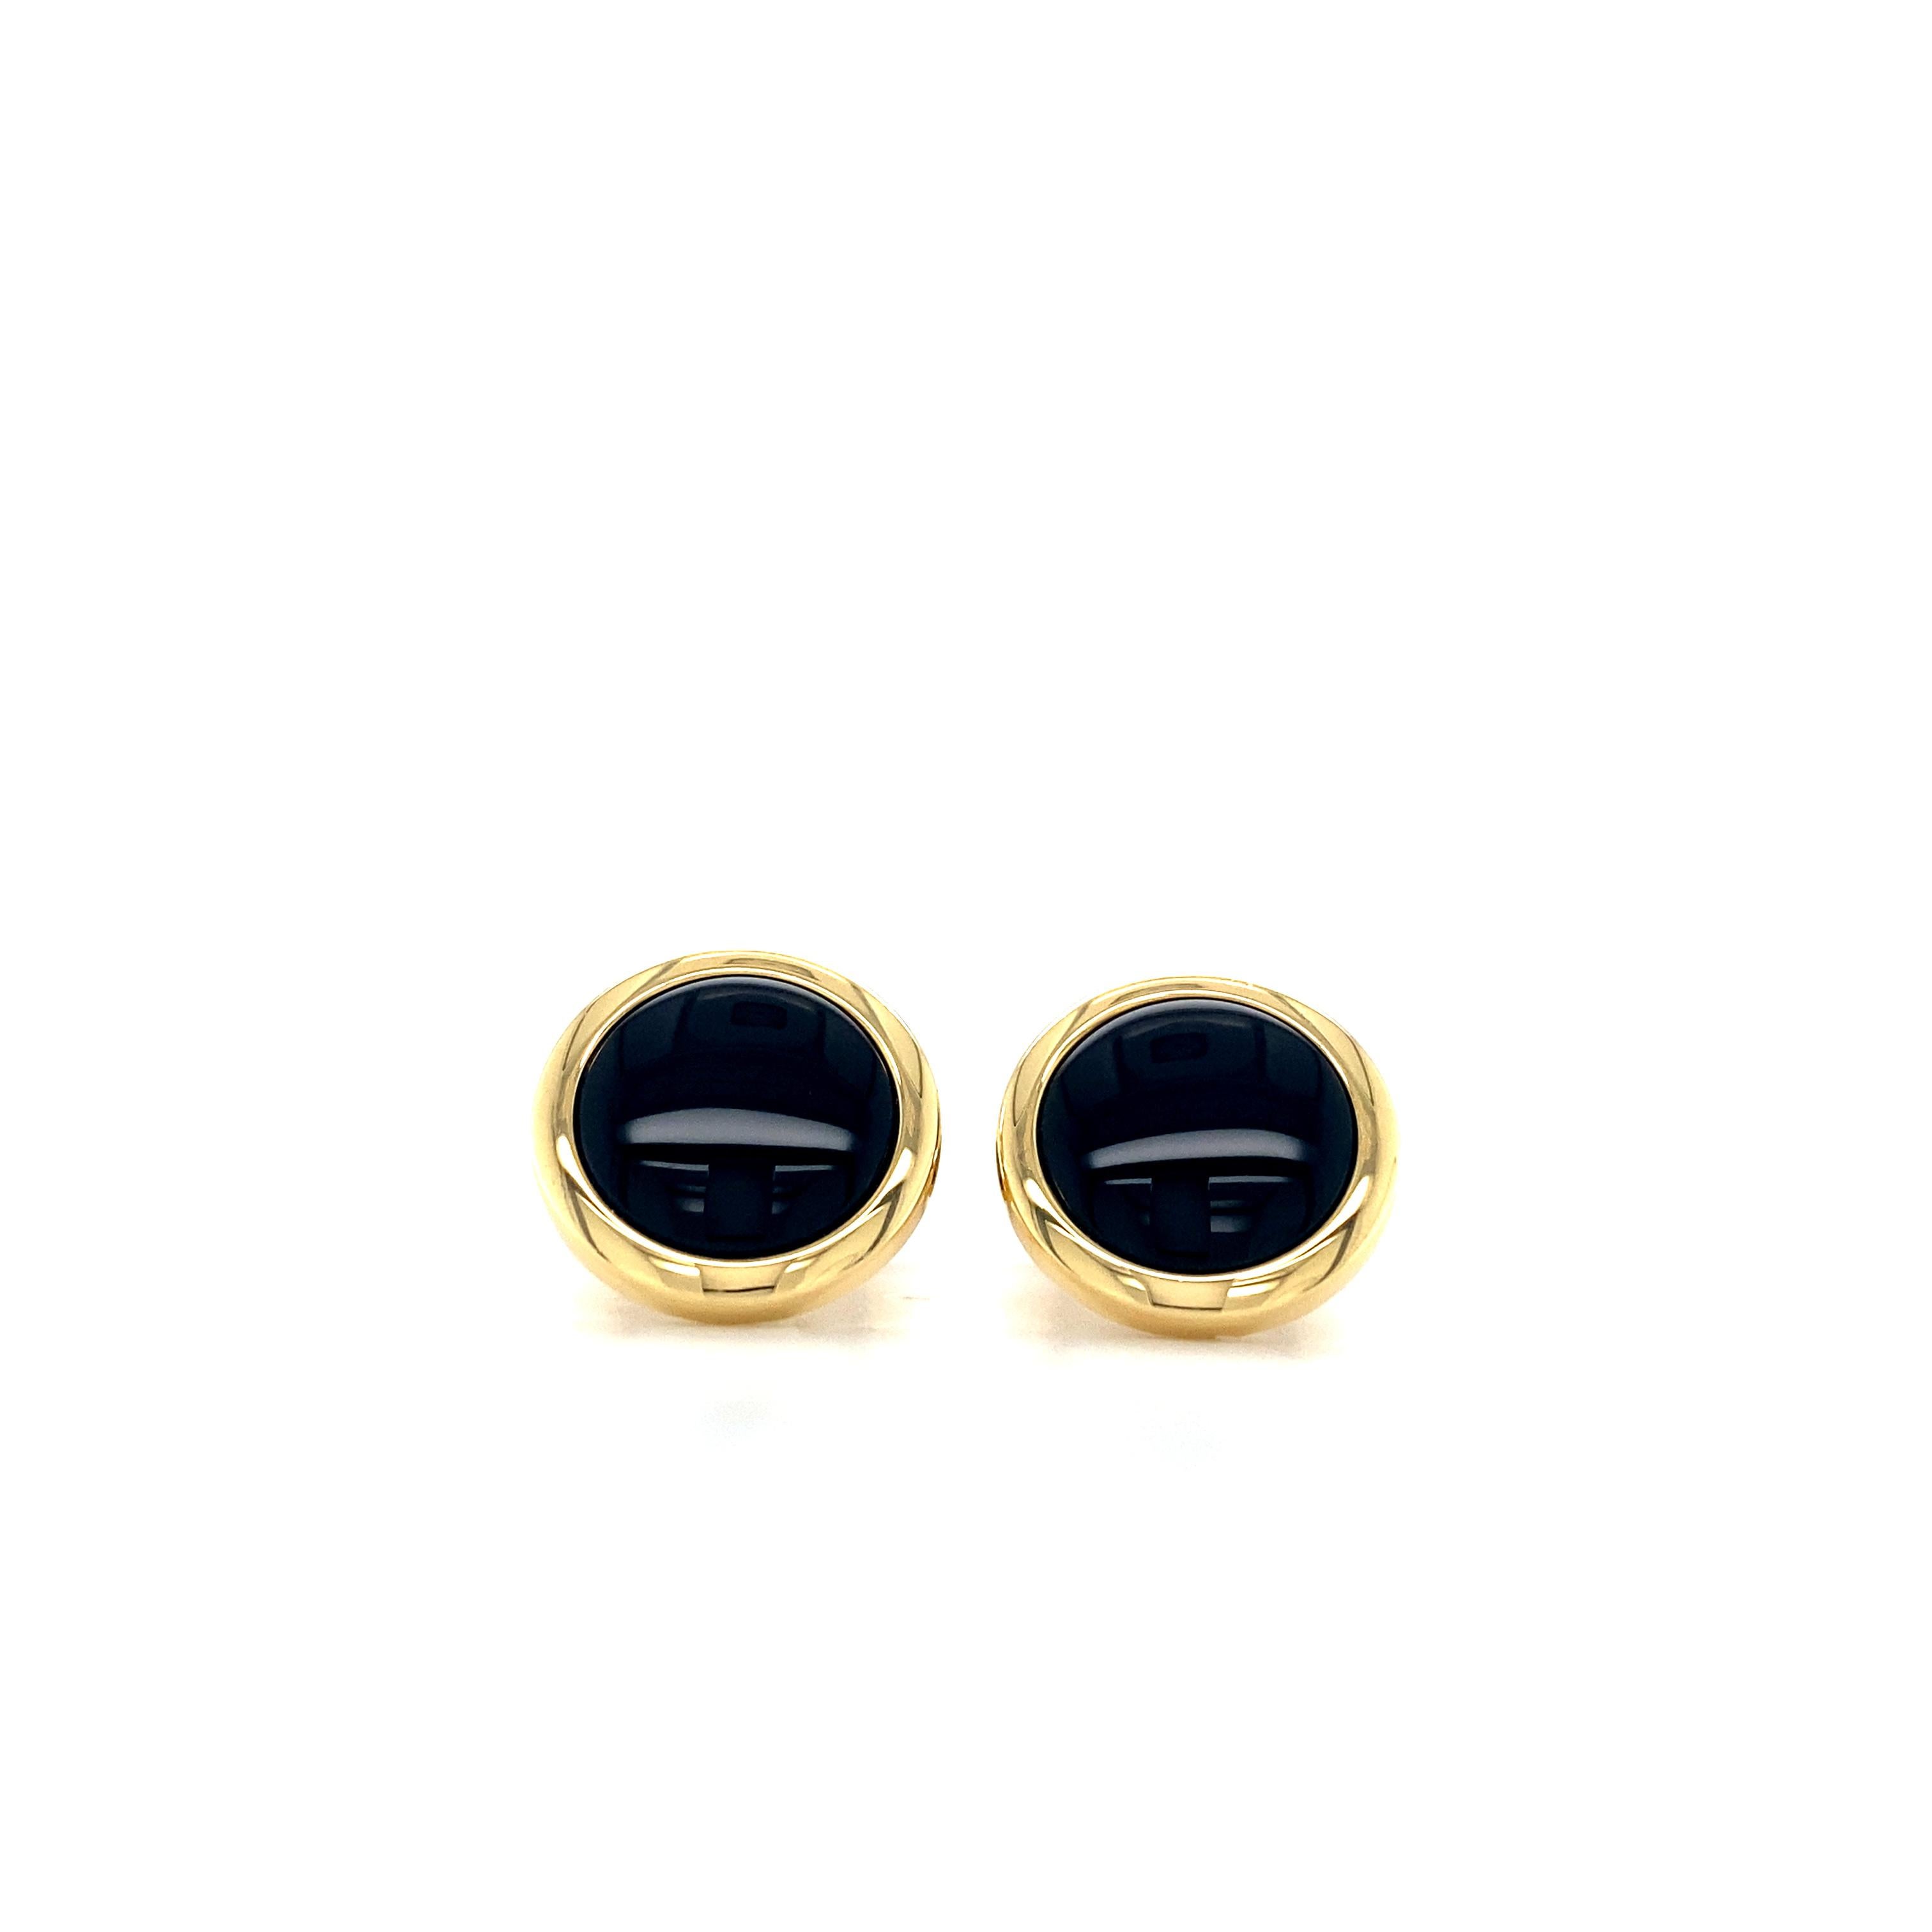 Victor Mayer round Cufflinks with domed bezel, Hallmark Collection, 18k Yellow Gold, 2 black Onyx Disc Inlays, Diameter approx. 15.5 mm

About the creator Victor Mayer
Victor Mayer is internationally renowned for elegant timeless designs and